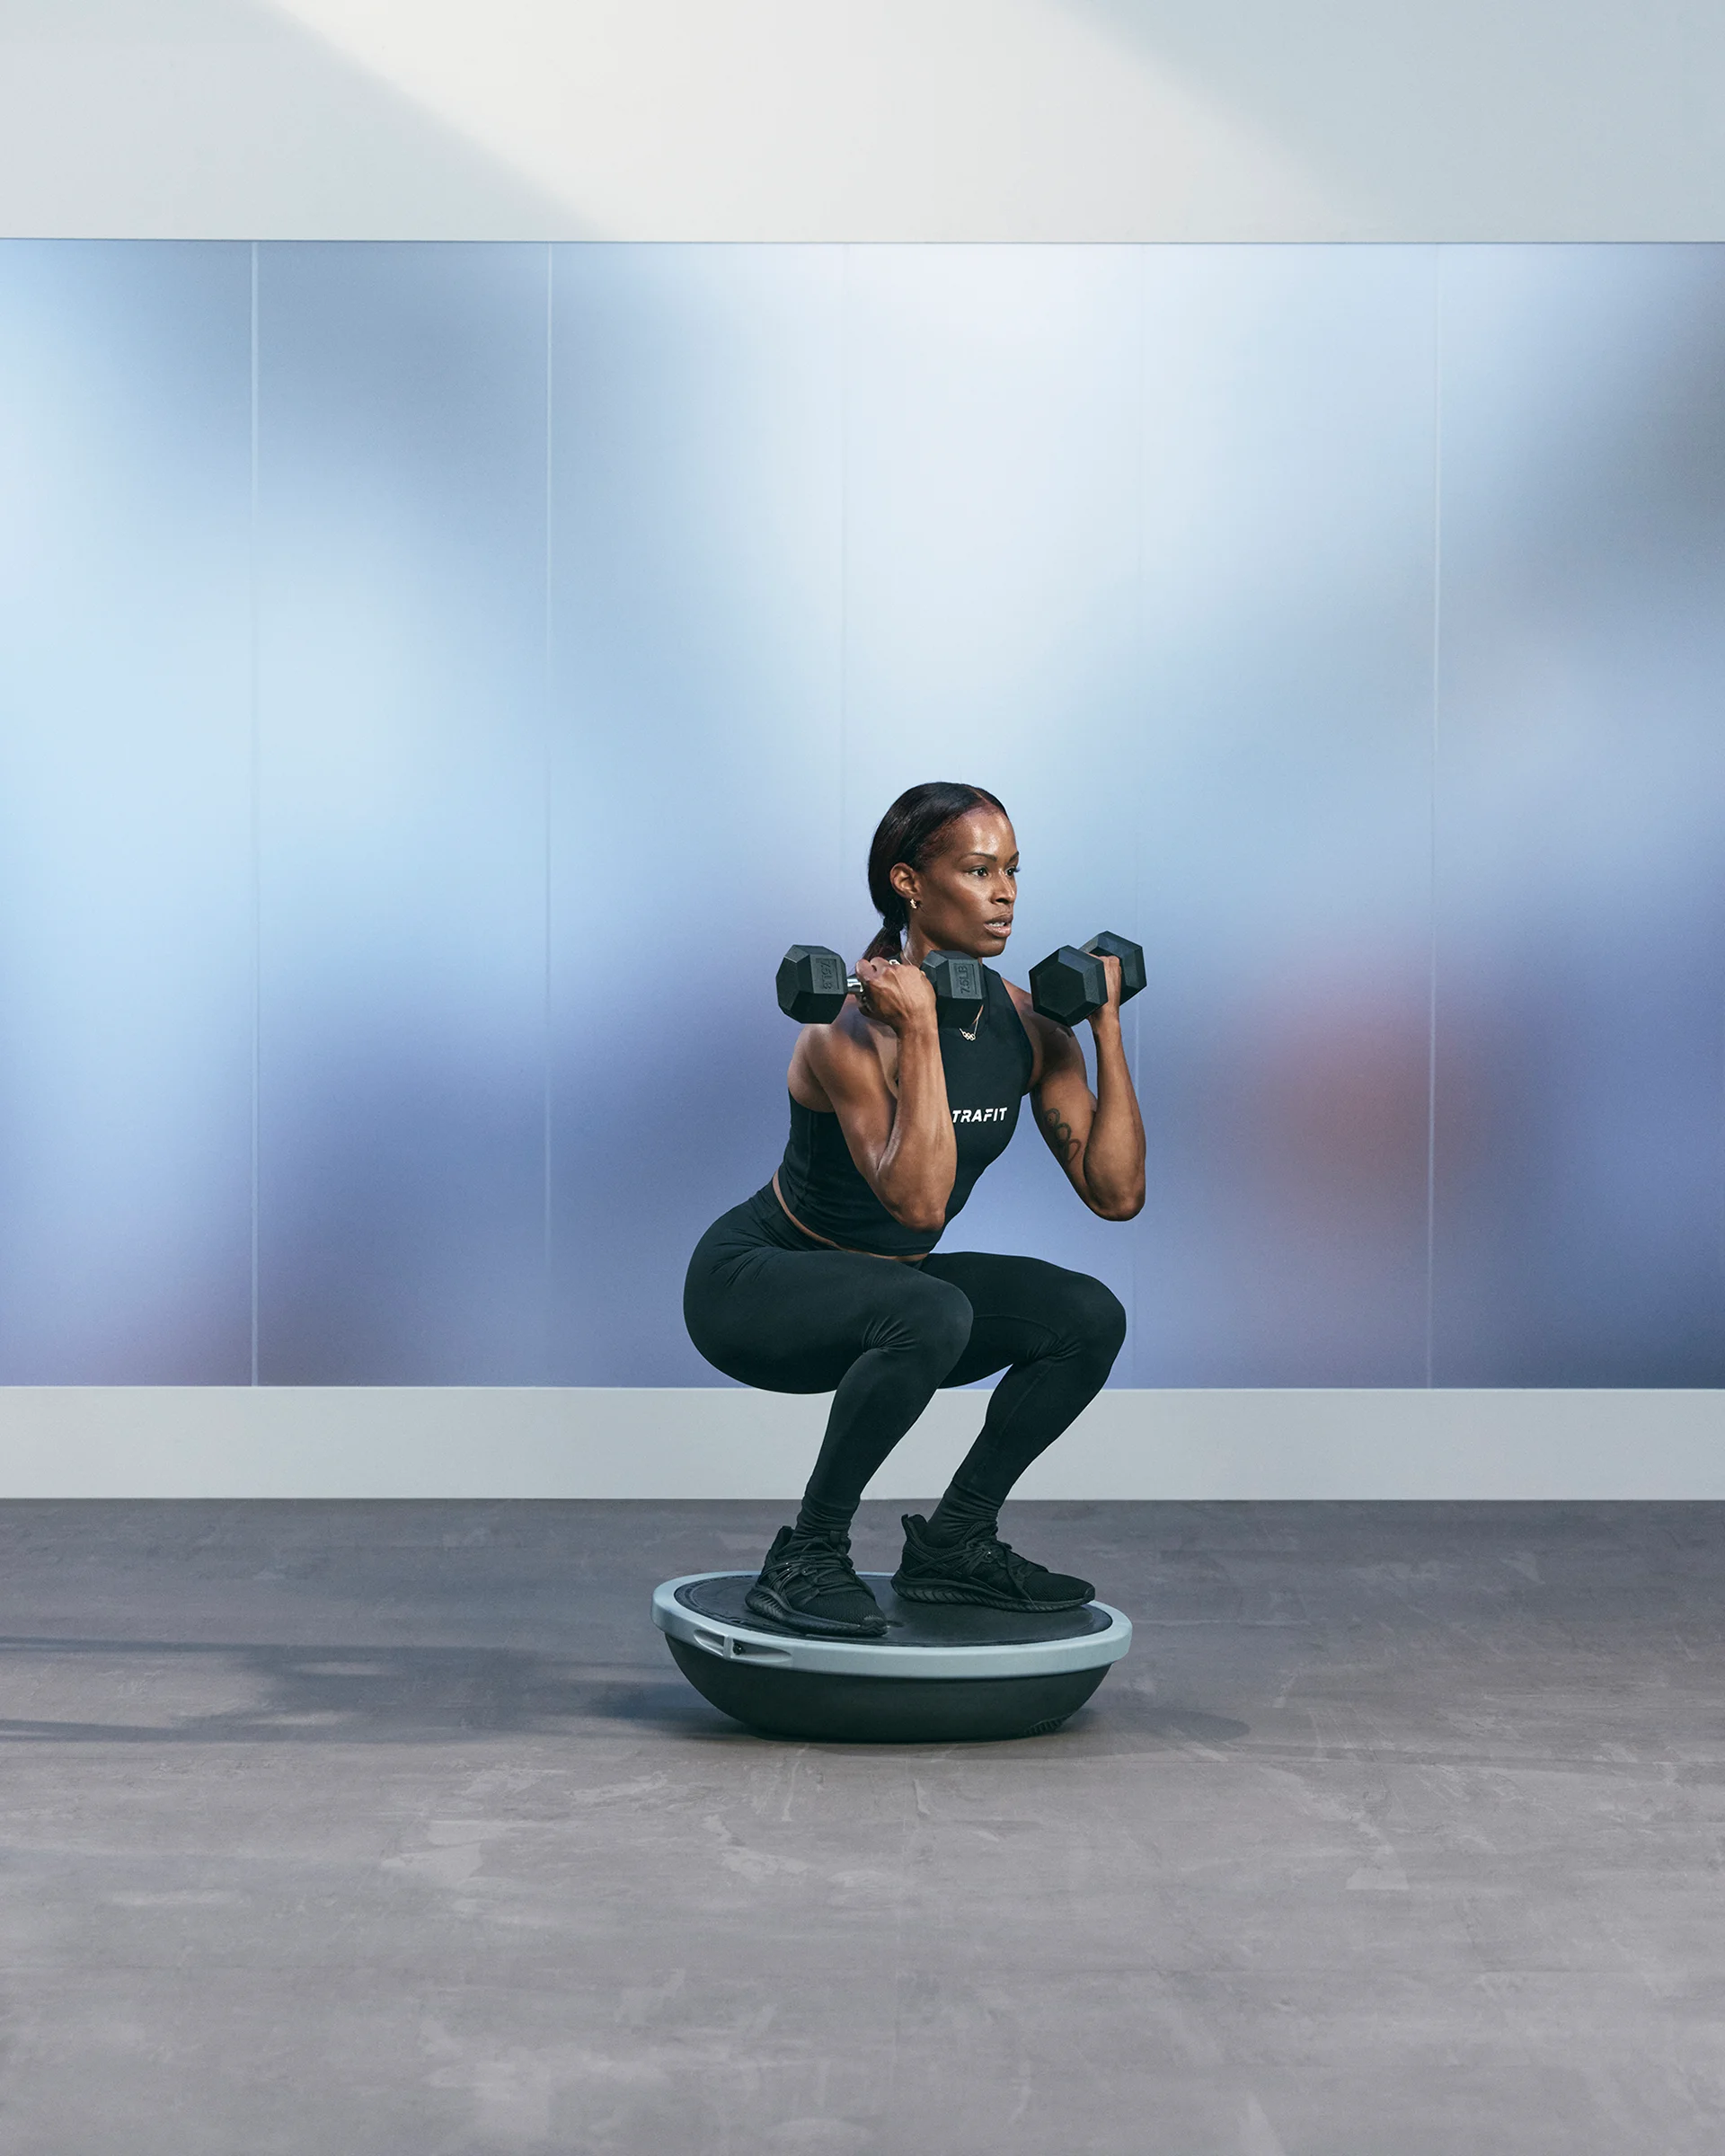 A Life Time member squatting on a bosu ball and holding dumbbells.